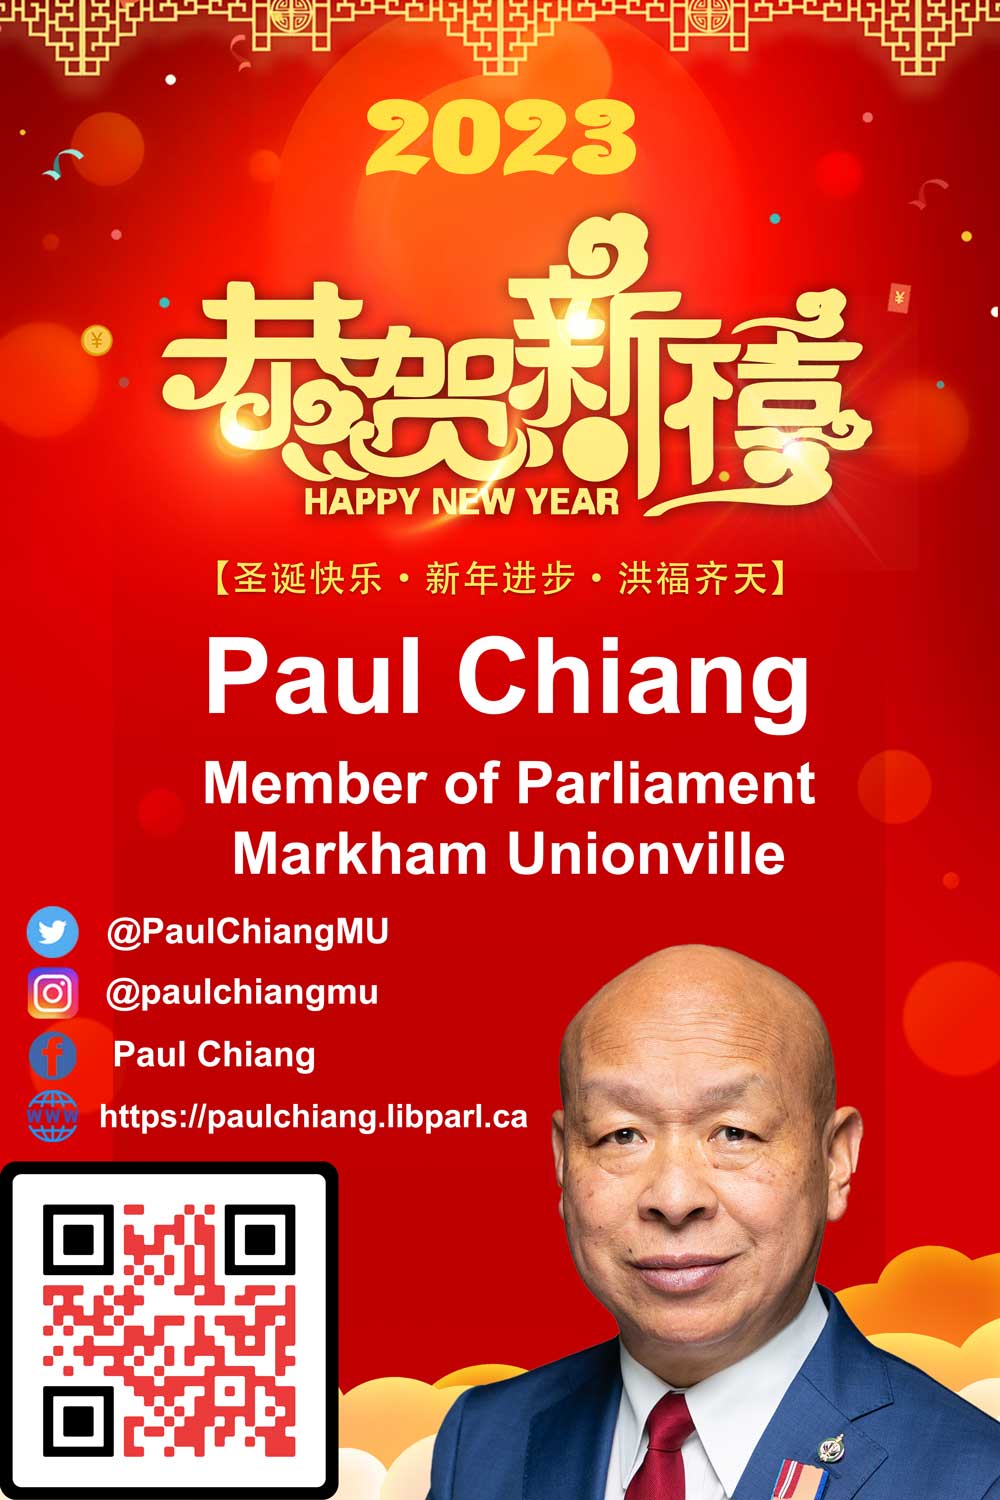 Happy New Year from Paul Chiang -- MP Markham Unionville Ontario